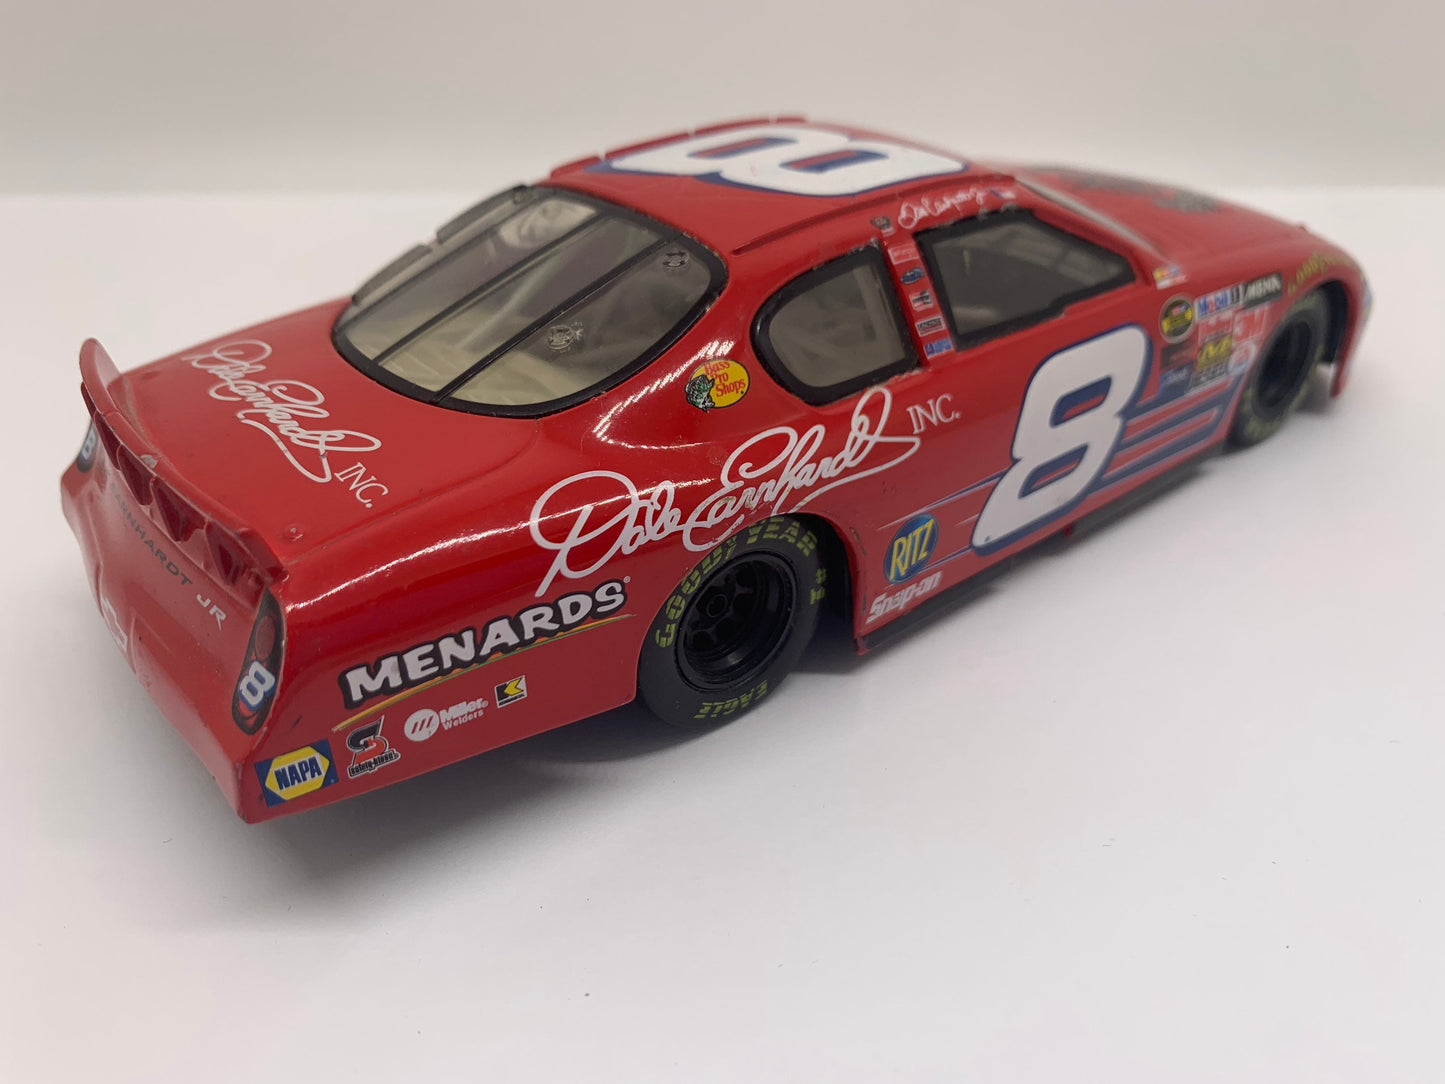 Action Dale Earnhardt Jr Chevy Monte Carlo Red Dale Earnhardt INC Perfect Birthday Gift Collectable 1:24 Scale Model Toy Car Nascar Replica